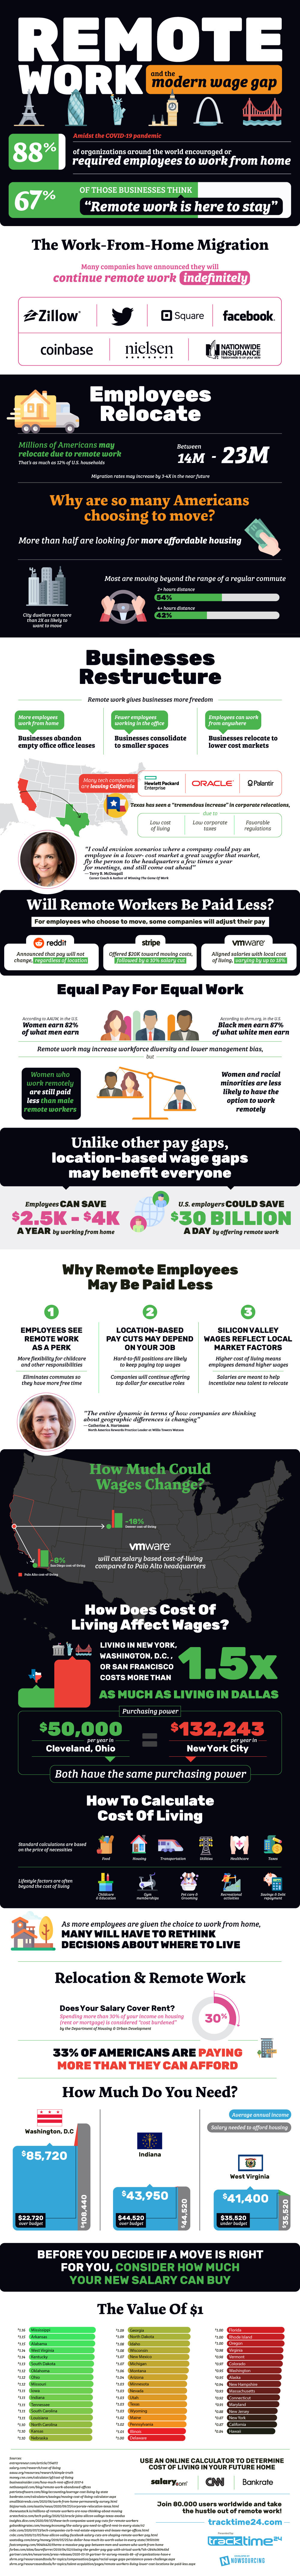 remote work and the pay gap (infographic)